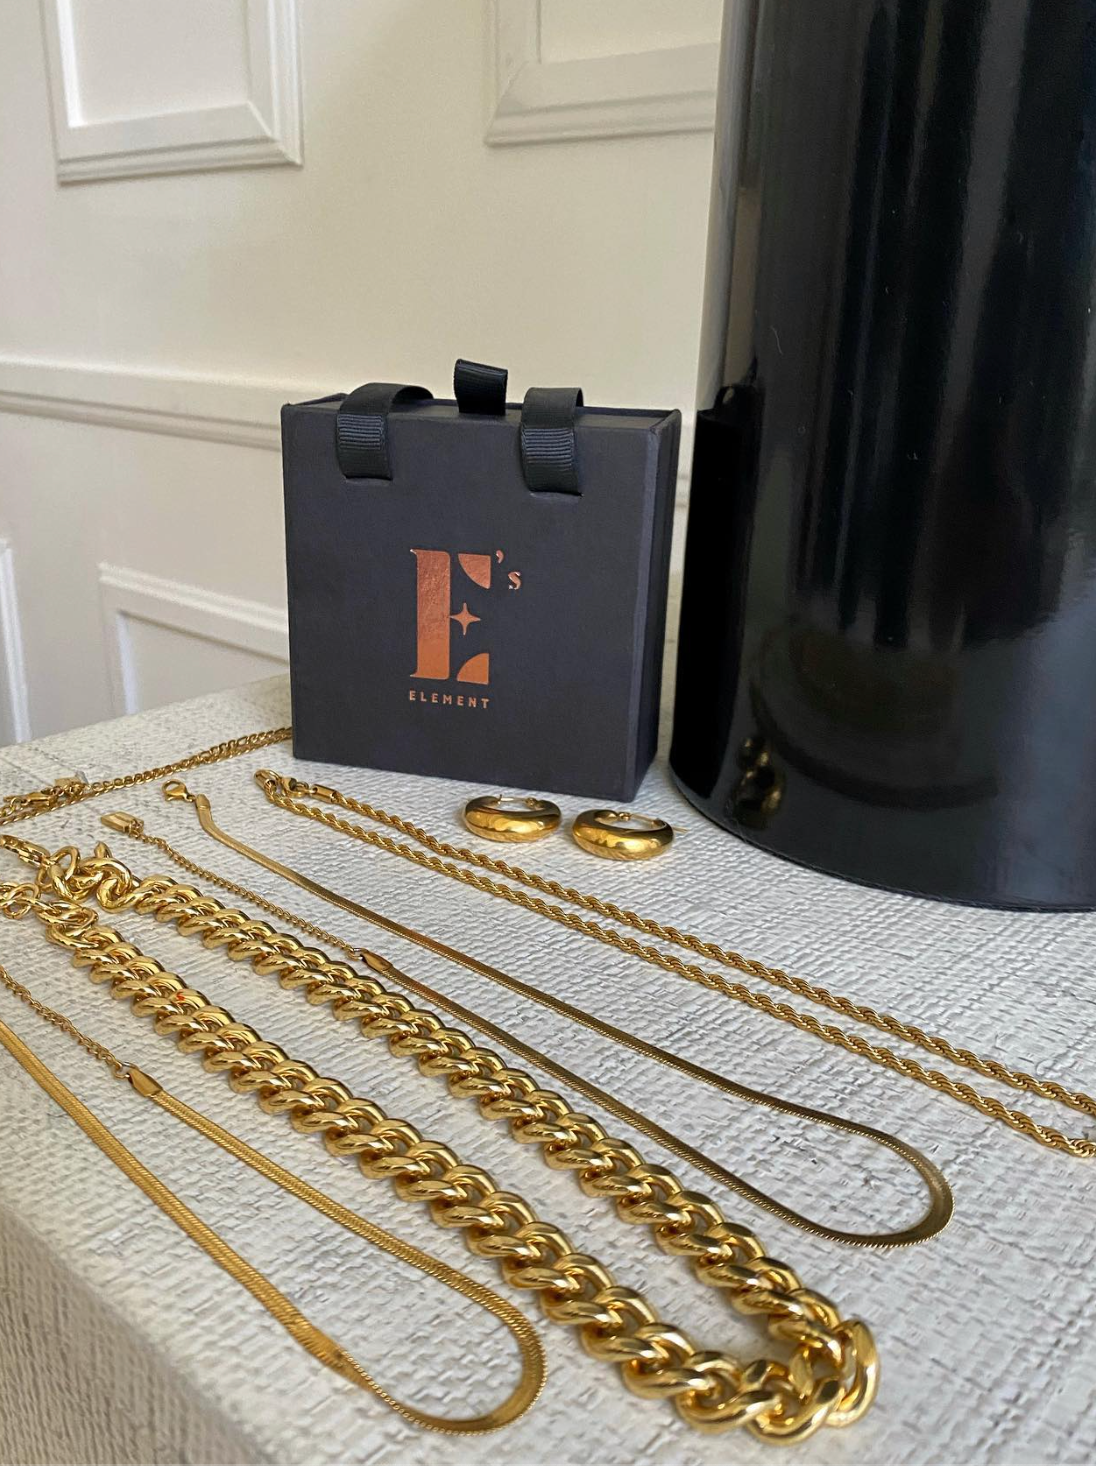 E's Element jewlery and branded packaging box on display on a table